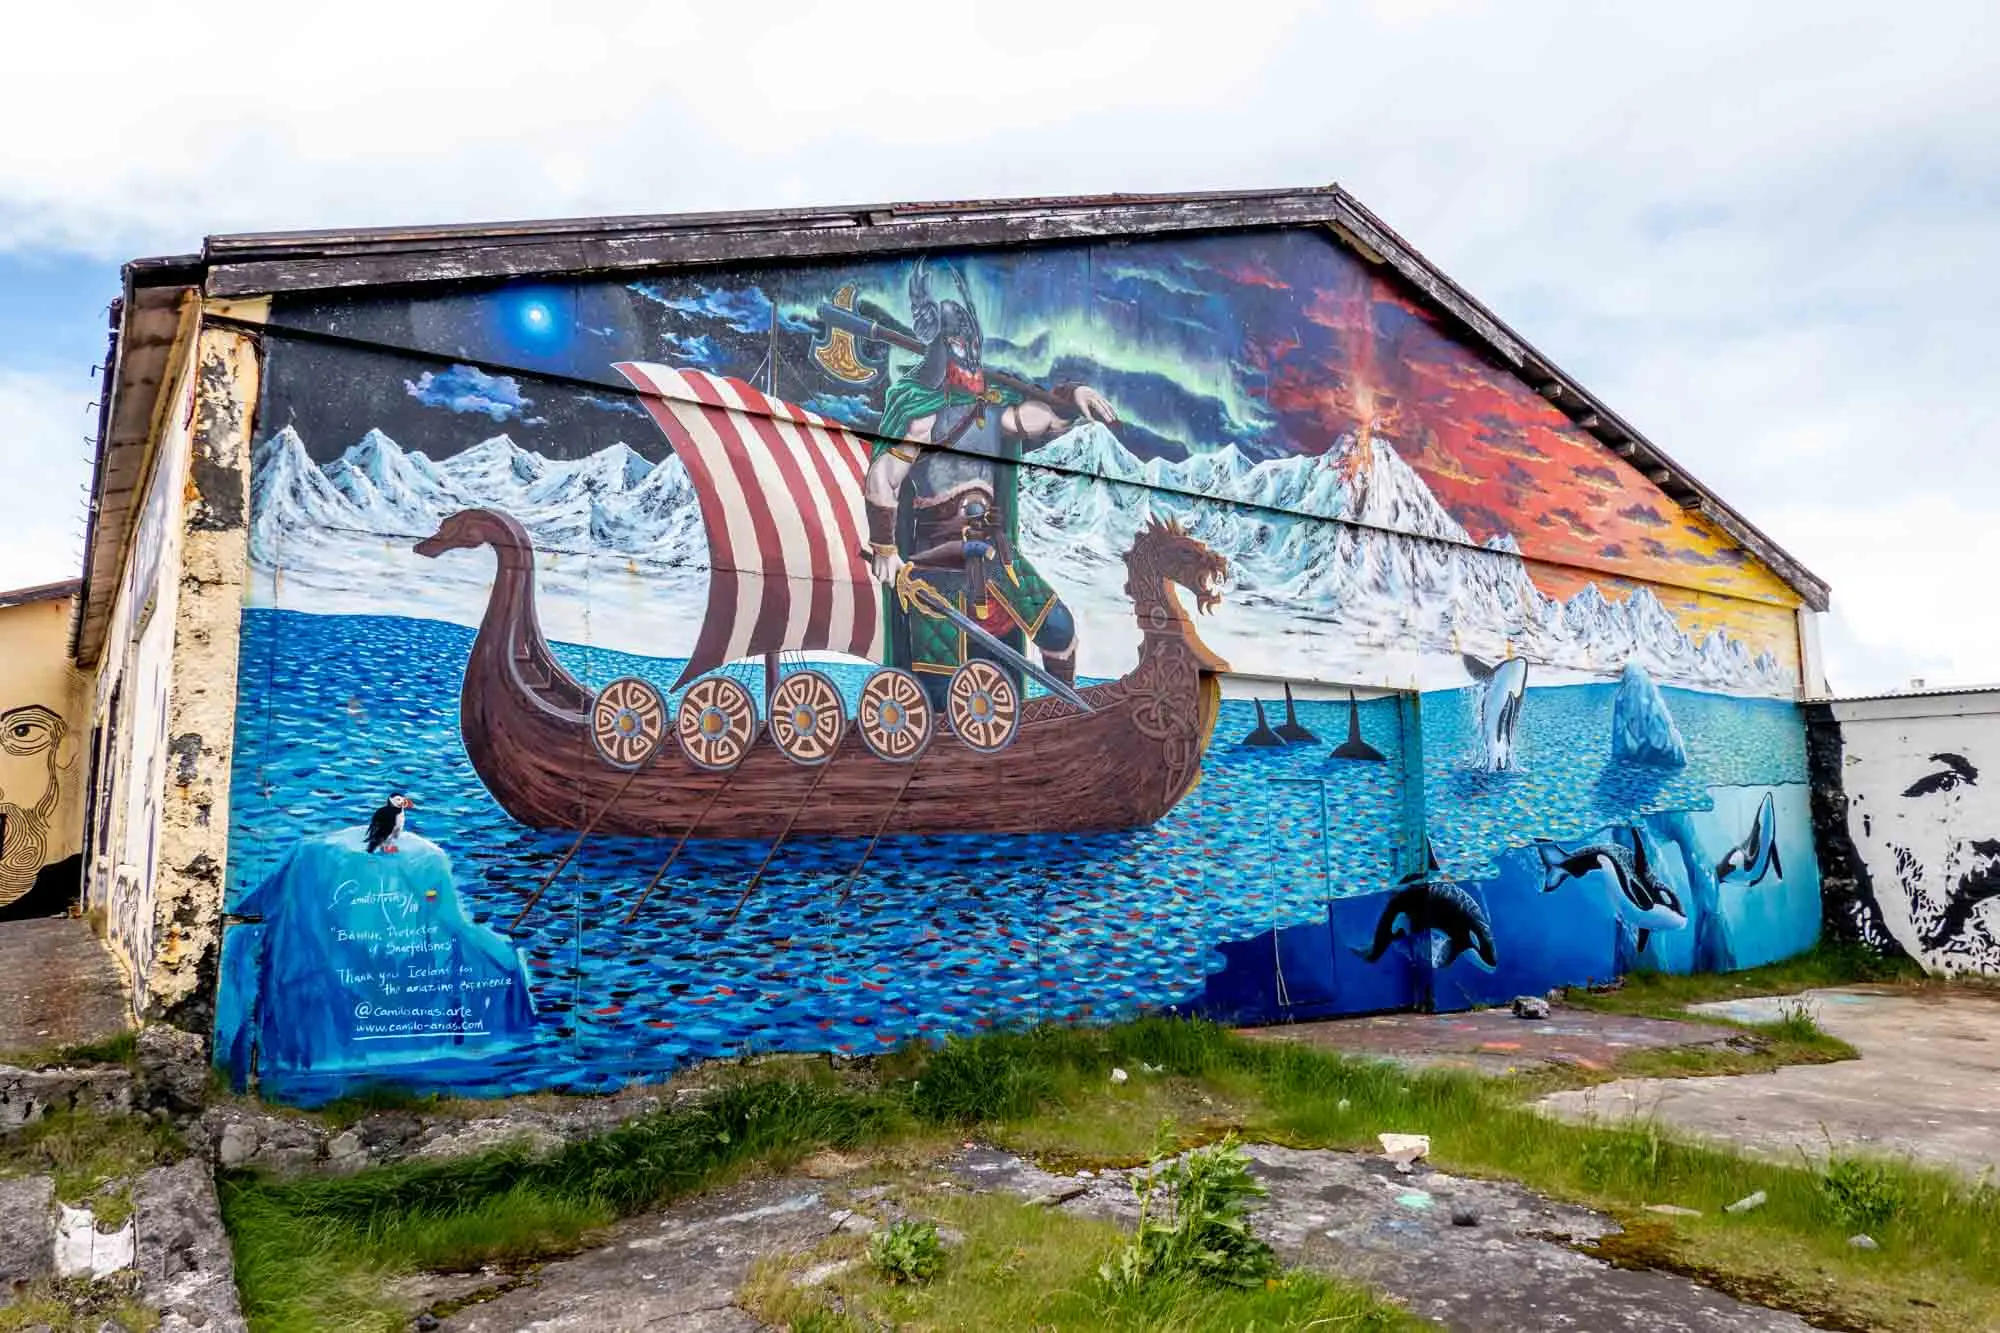 Street art mural of Bardur sailing on Viking ship in front of exploding volcano with puffins and orcas in the water